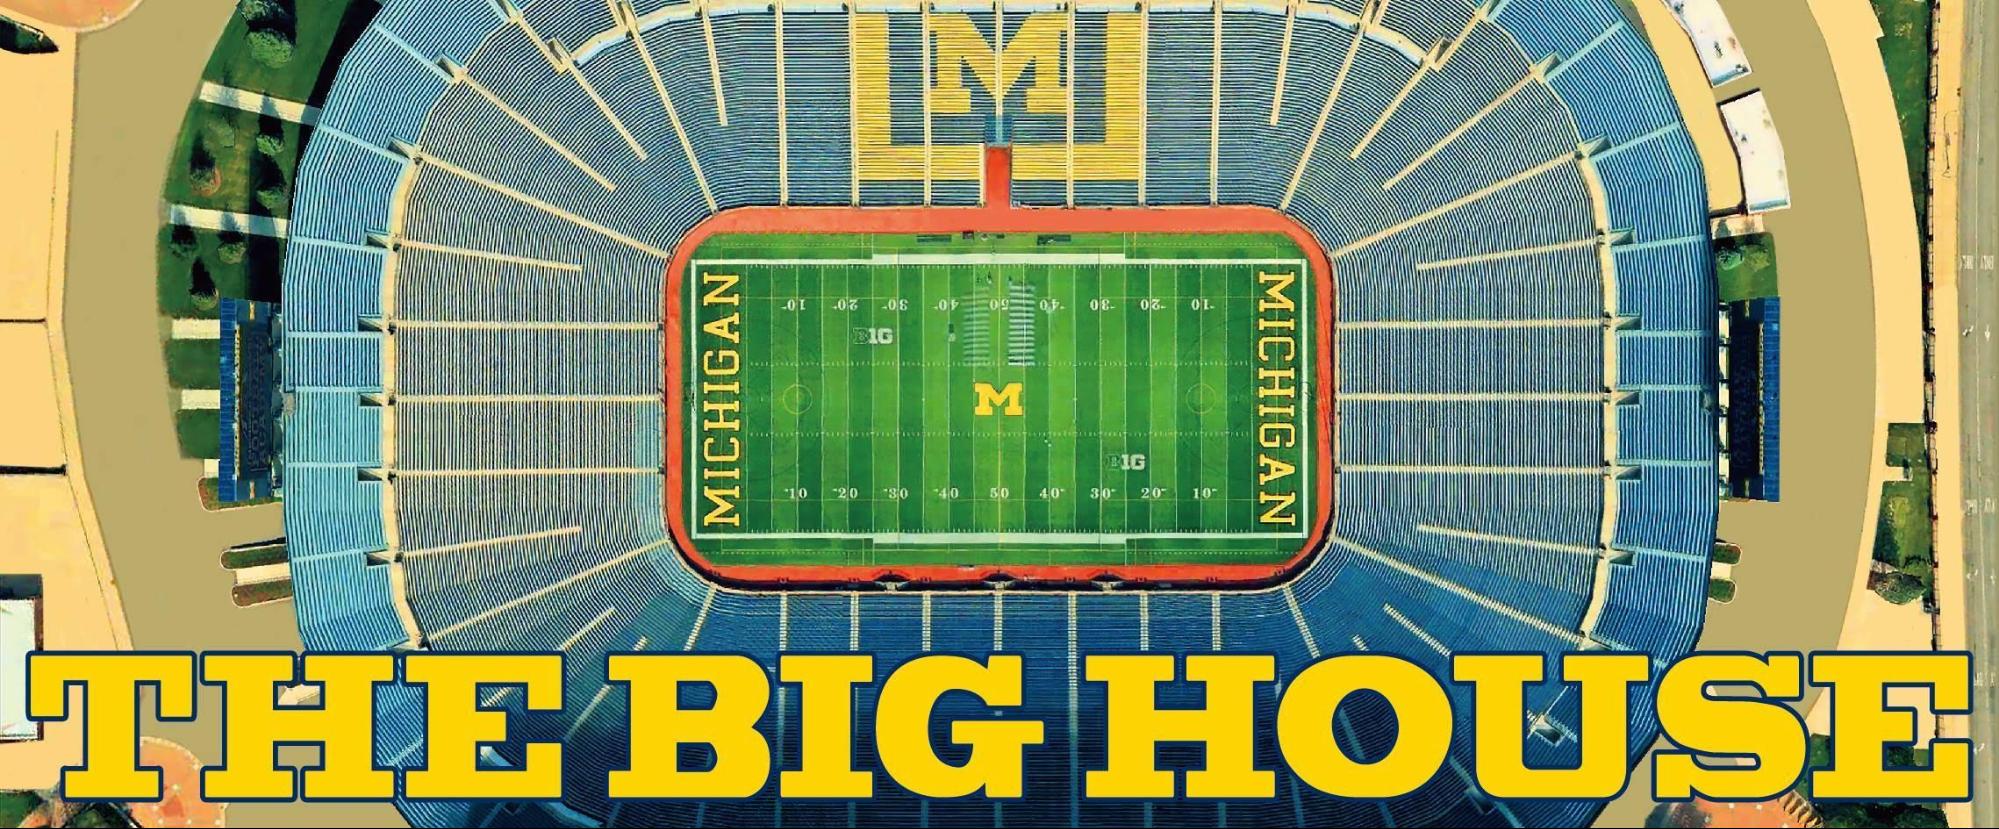 FEAT-TheBigHouse-2 Image